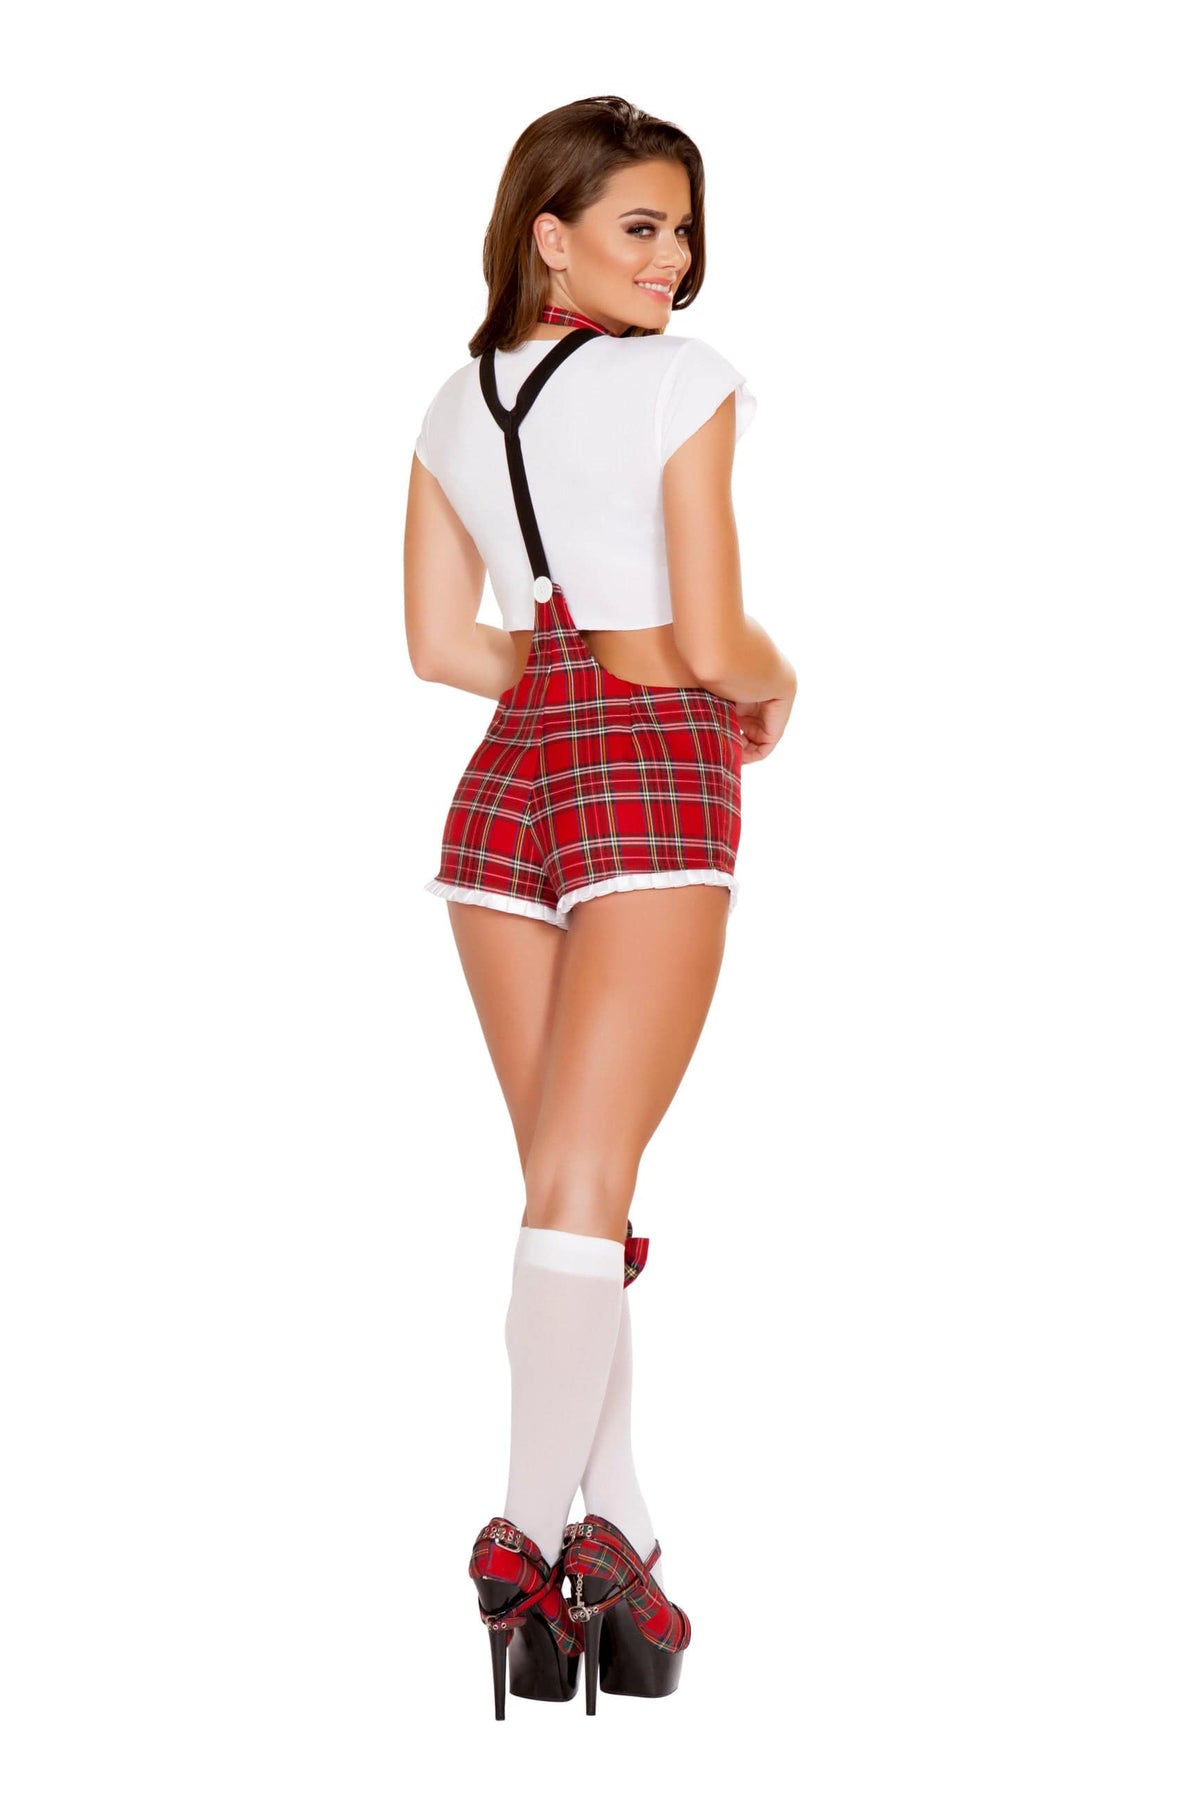 Elegant Moments Red / Medium Sexy Teacher&#39;s Pet School Girl 2 Pc Costume SHC-4755-M-R Extra Credit Cutie School Girl Costume | ELEGANT MOMENTS 99108 Apparel &amp; Accessories &gt; Clothing &gt; One Pieces &gt; Jumpsuits &amp; Rompers